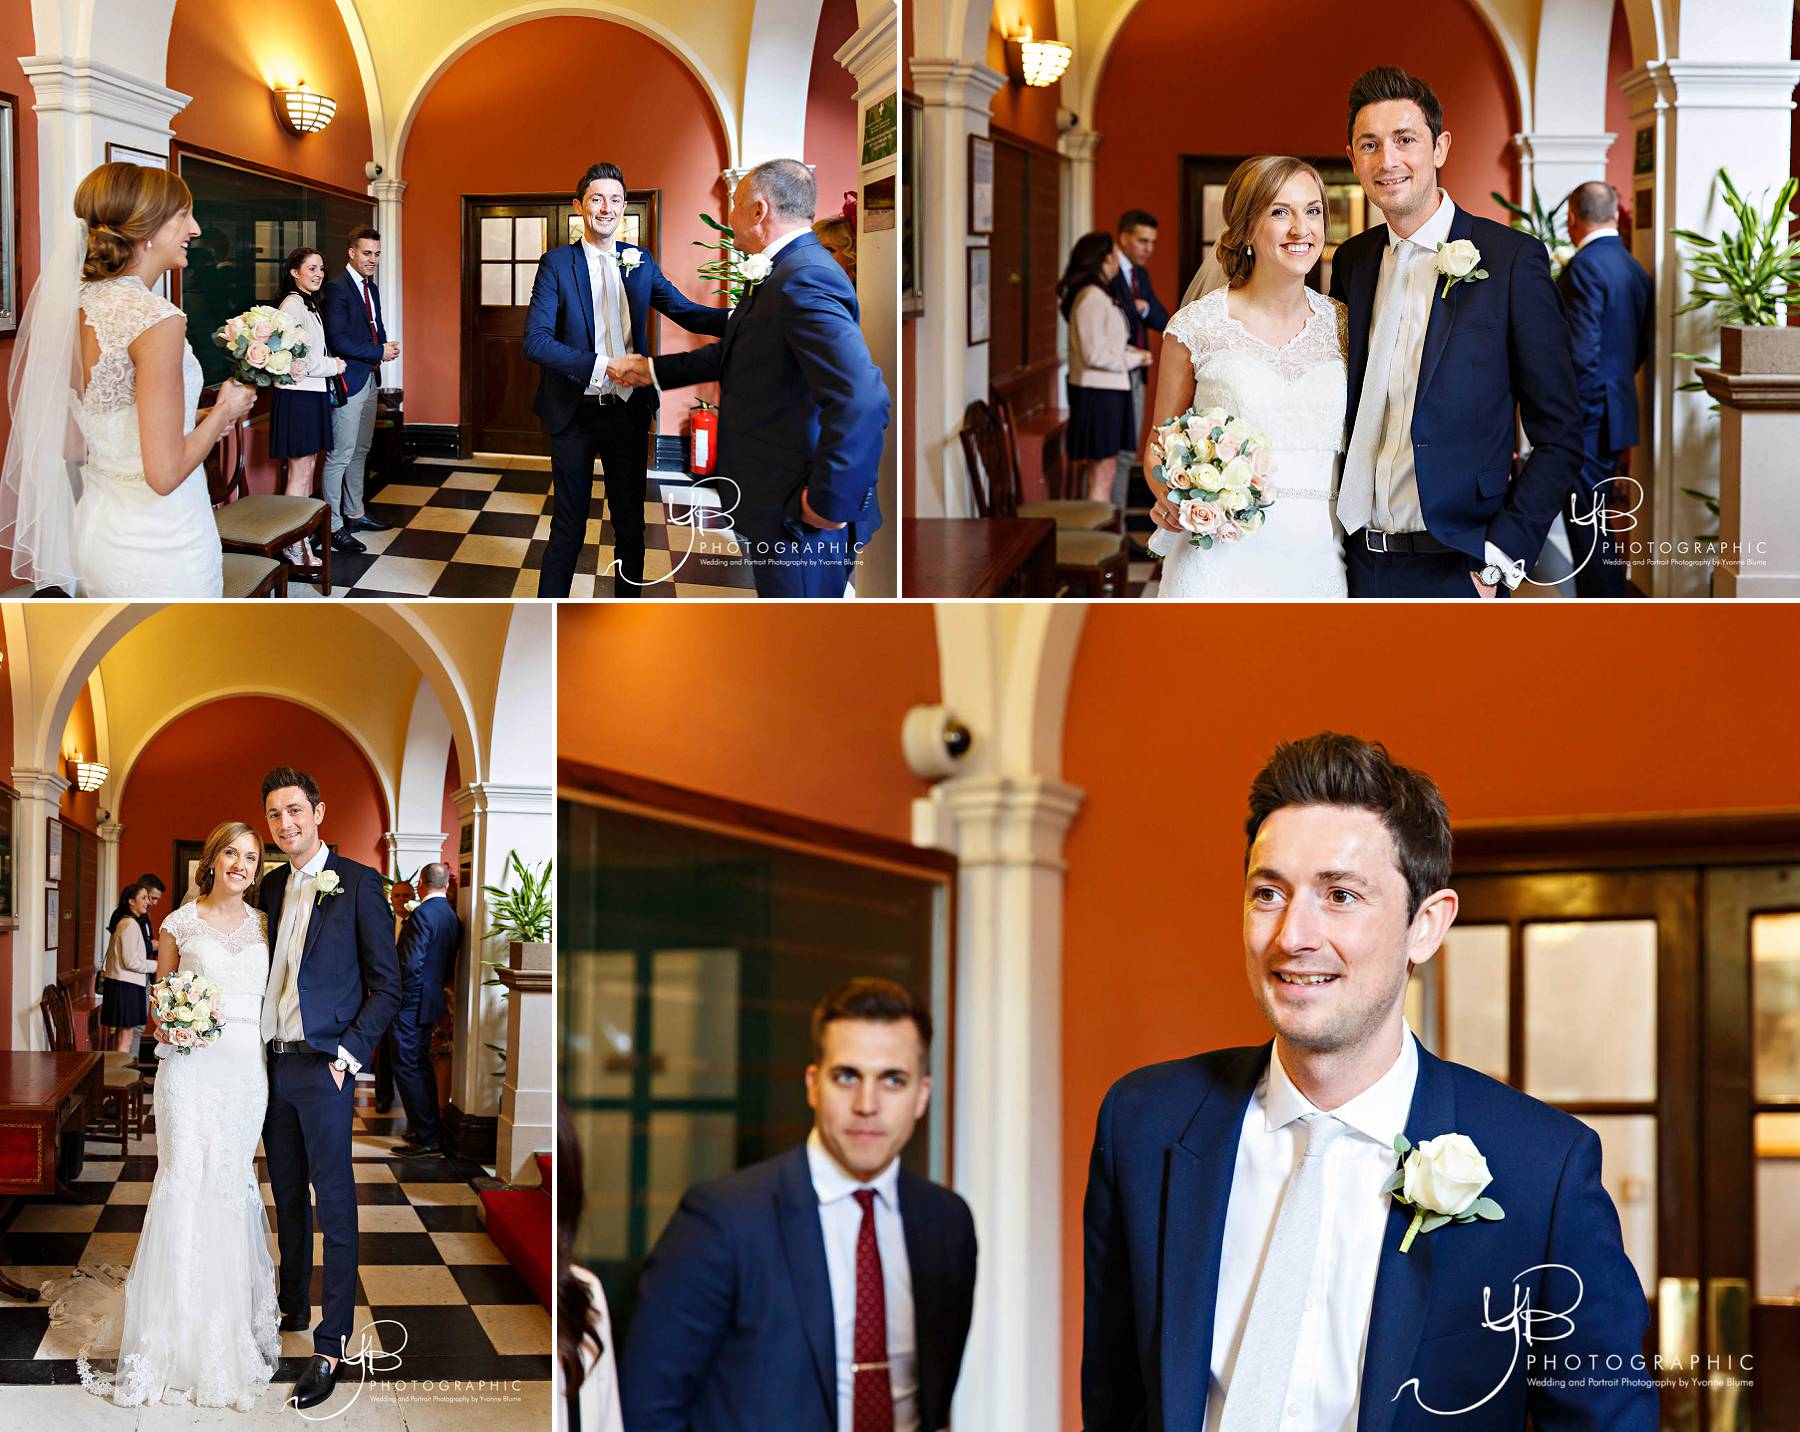 The groom sees his bride for the first time during this Chelsea Spring Wedding